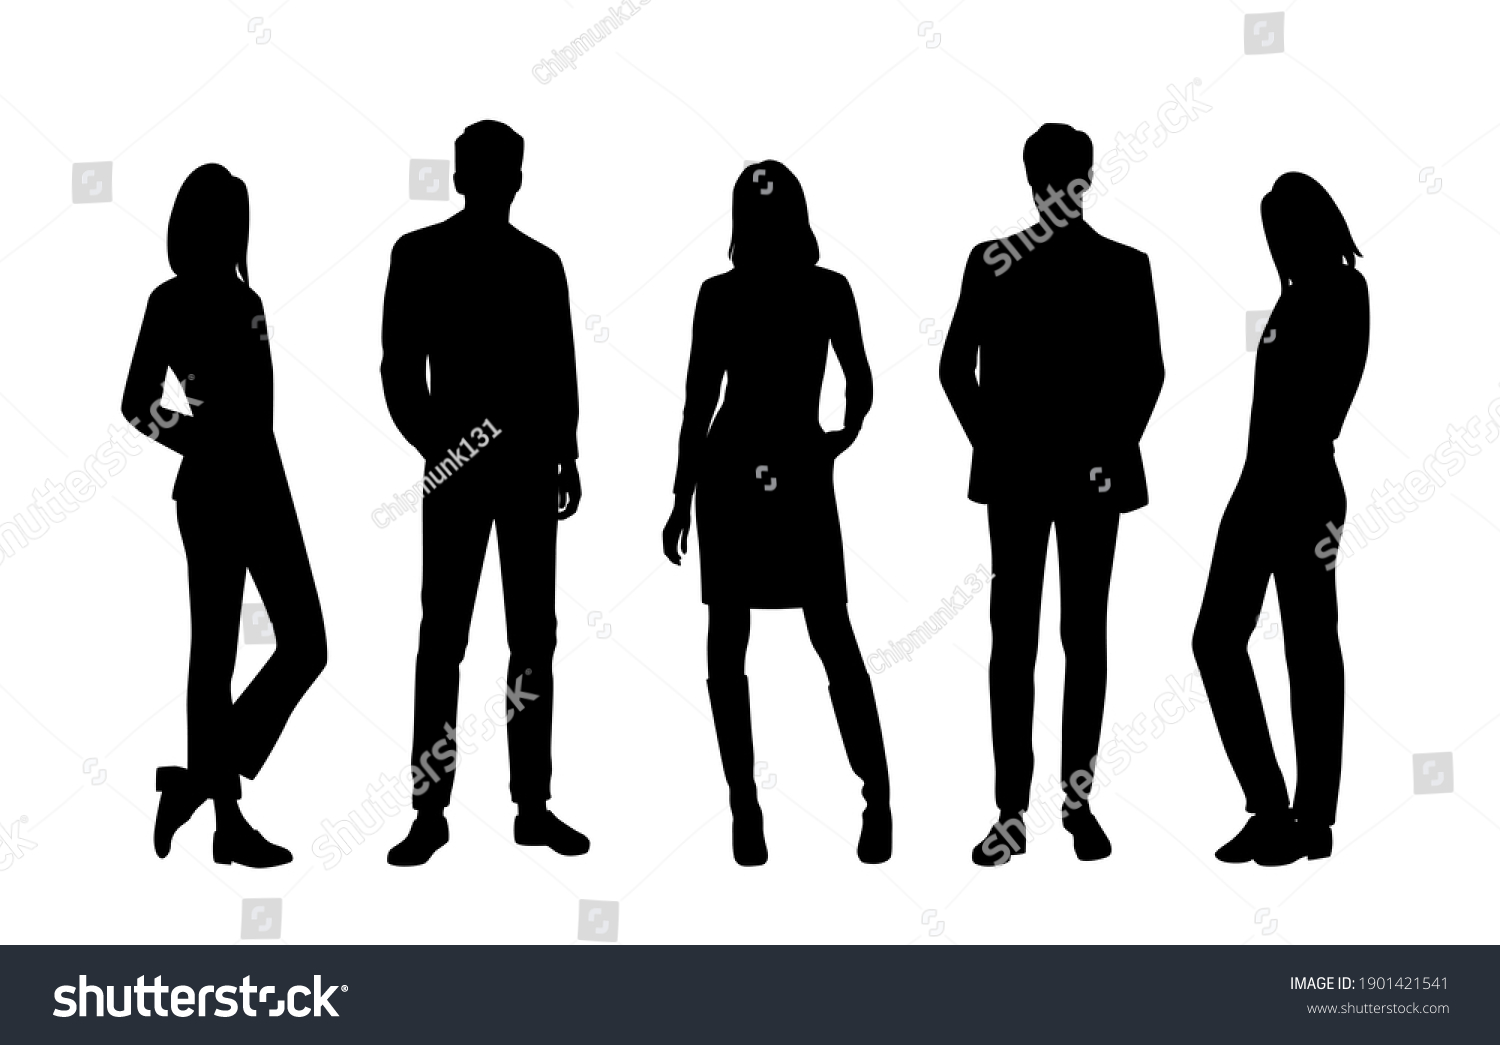 Vector silhouettes of  men and a women, a group of standing  business people, black  color isolated on white background #1901421541